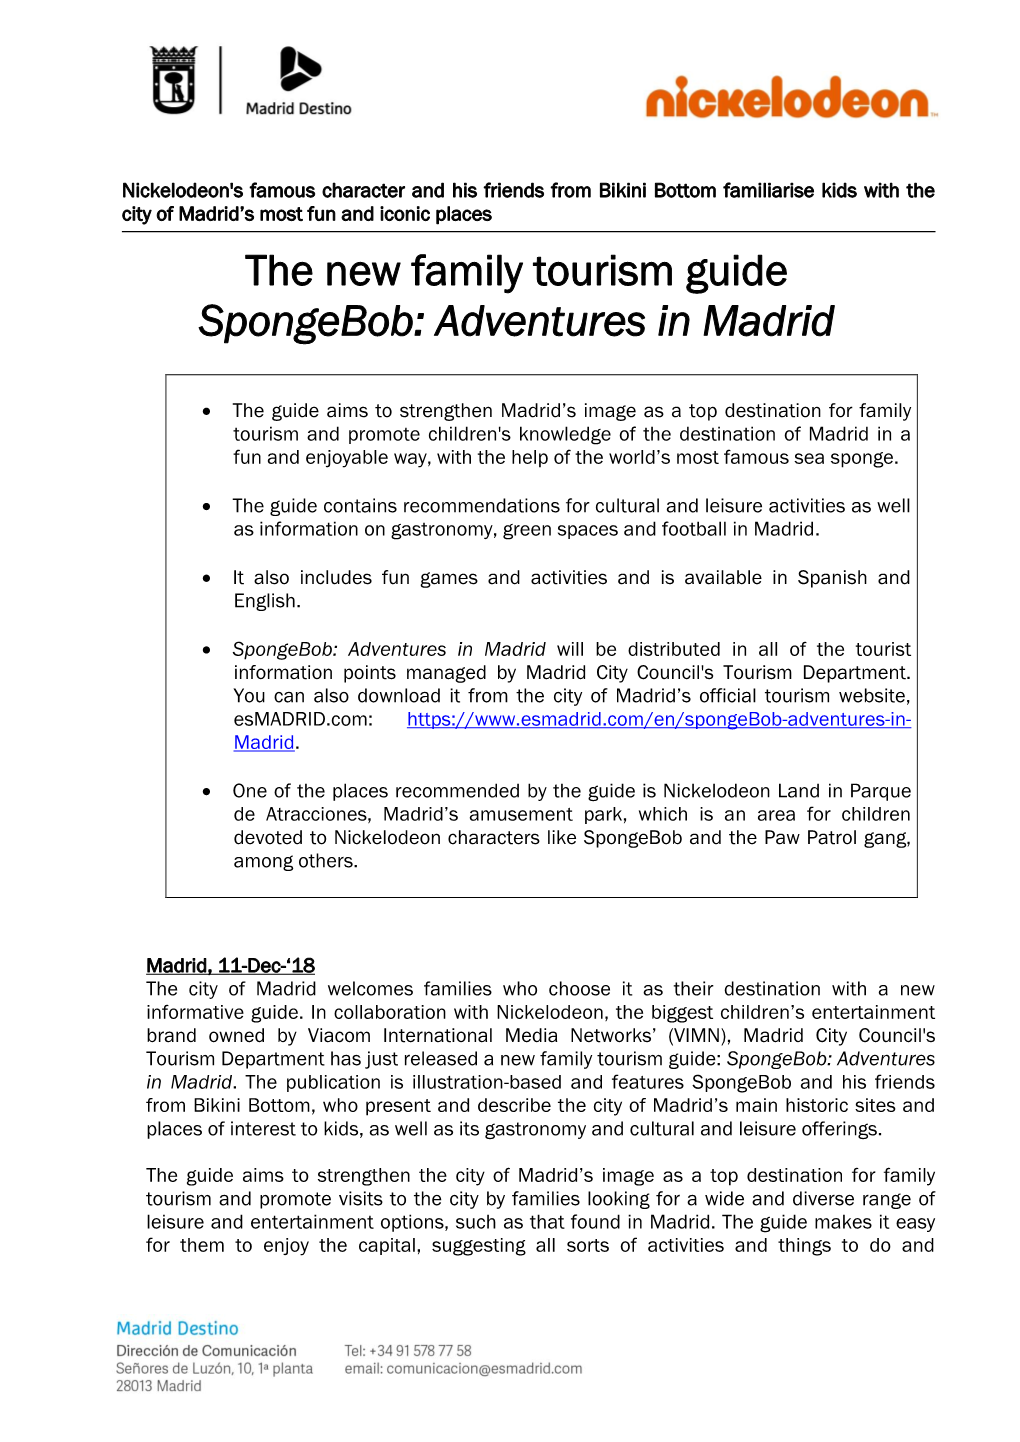 The New Family Tourism Guide Spongebob: Adventures in Madrid